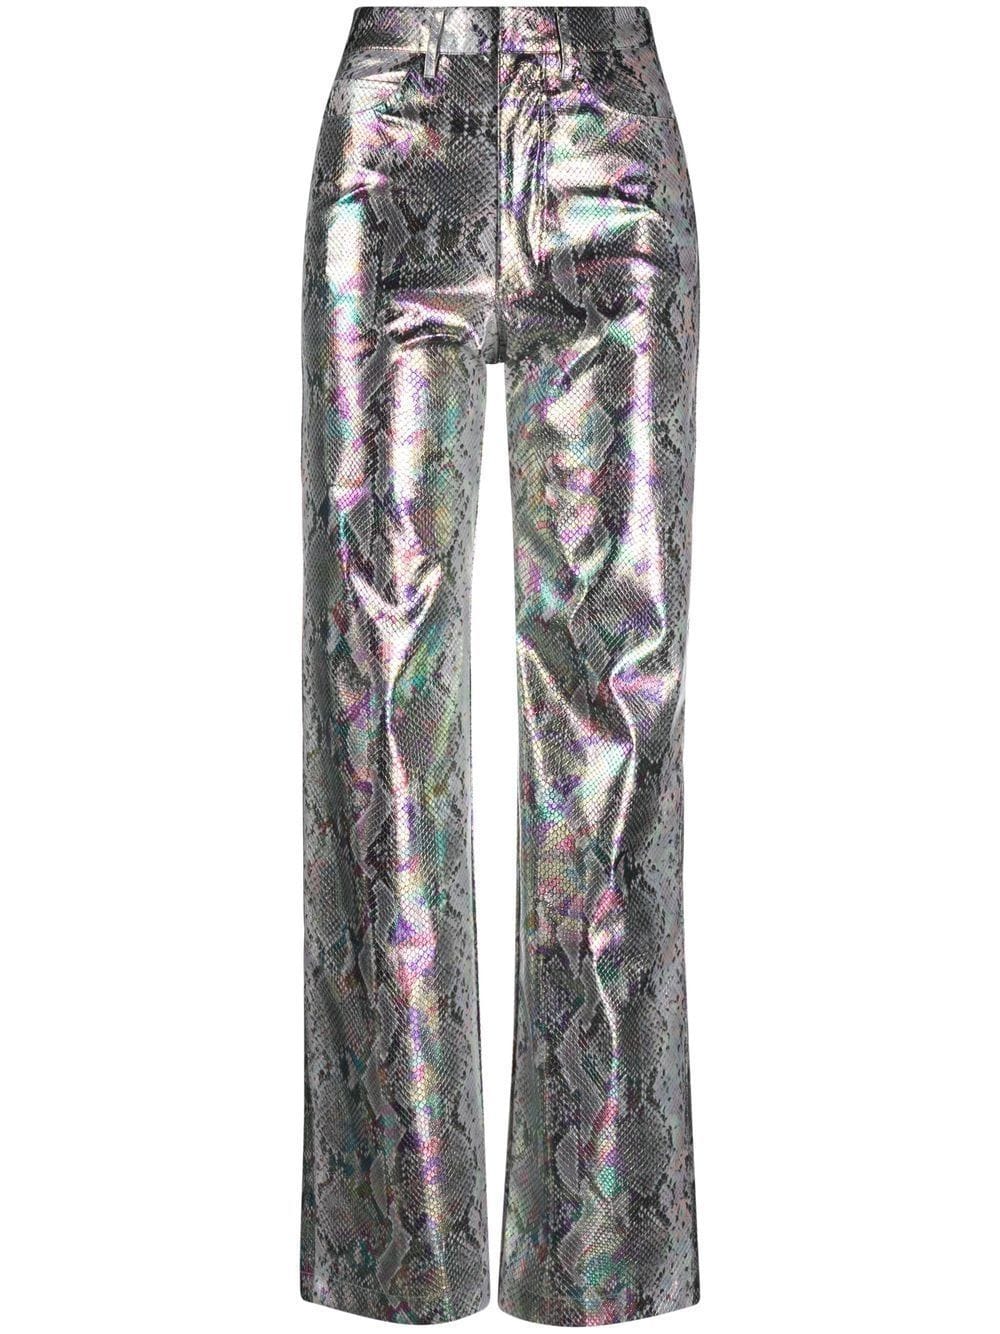 ROTATE holographic snakeskin-print trousers